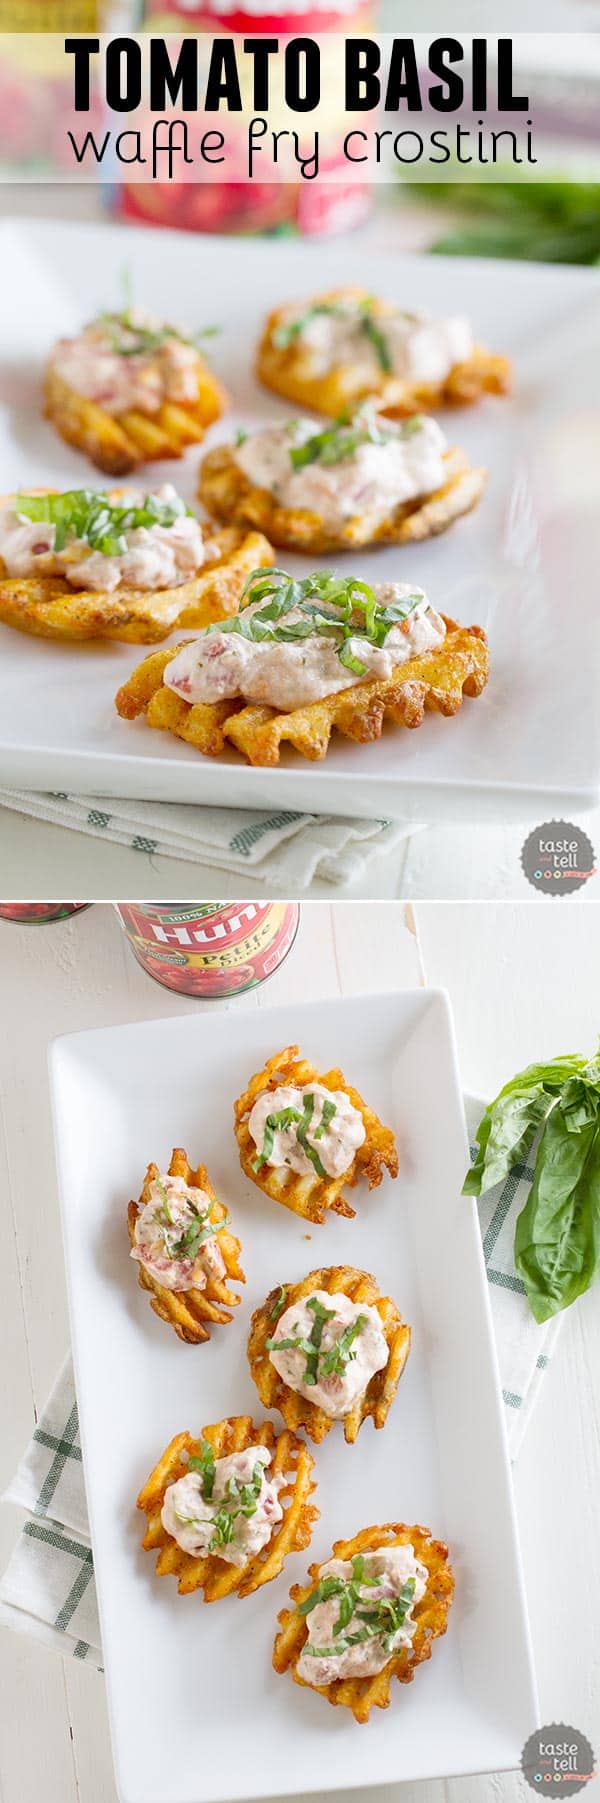 These Tomato Basil Waffle Fry Crostini are a fun way to serve an addictive dip. My husband said they are good enough to be served at a restaurant!